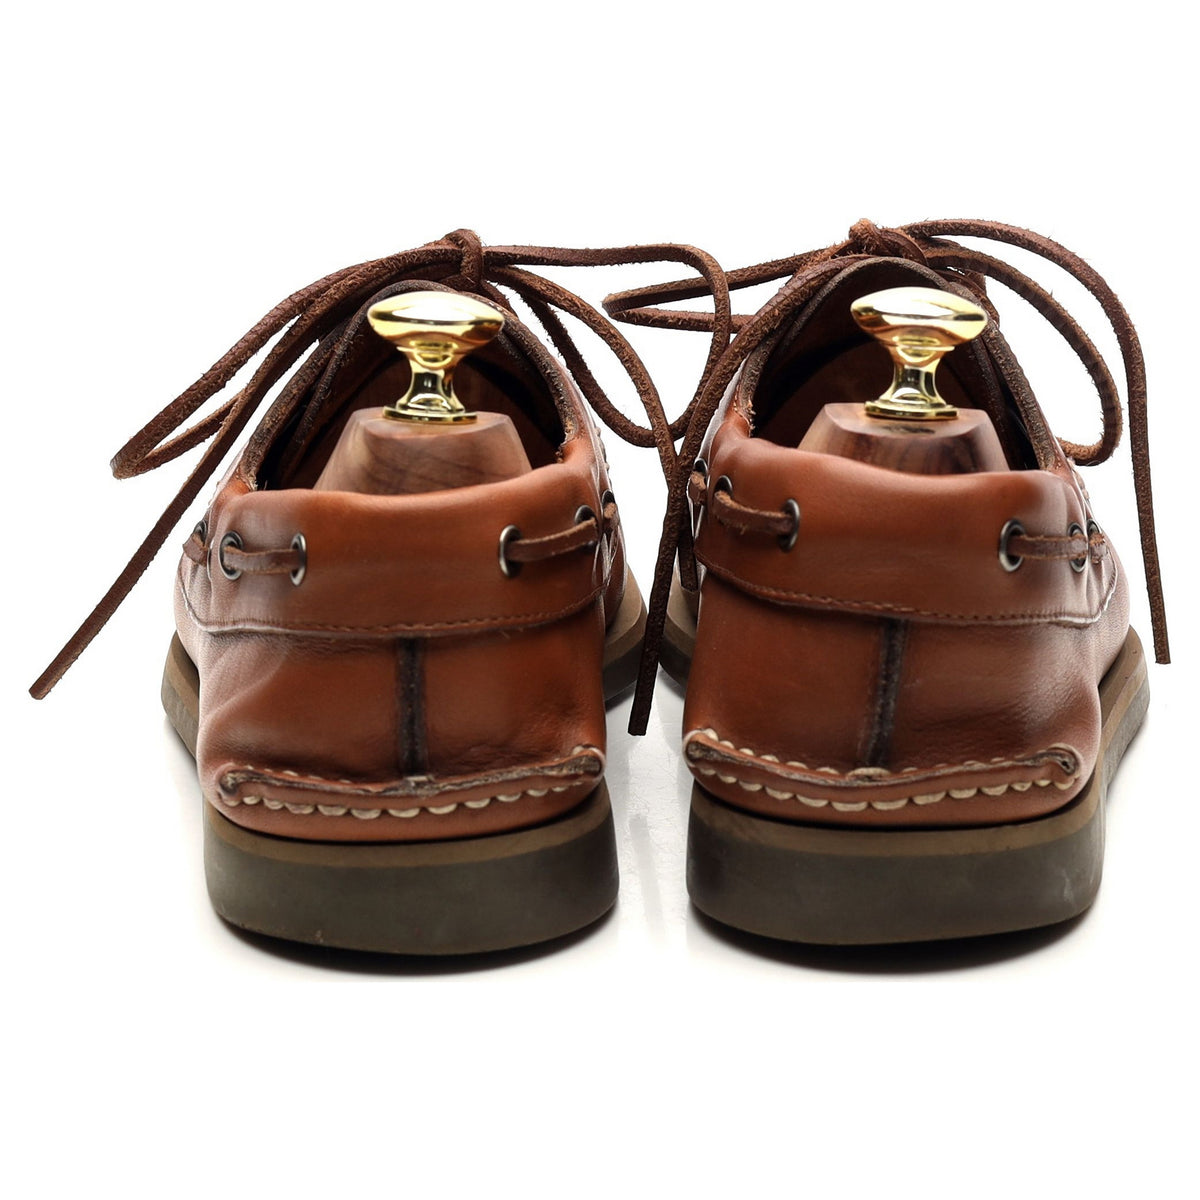 Brown Leather Boat Shoes UK 7.5